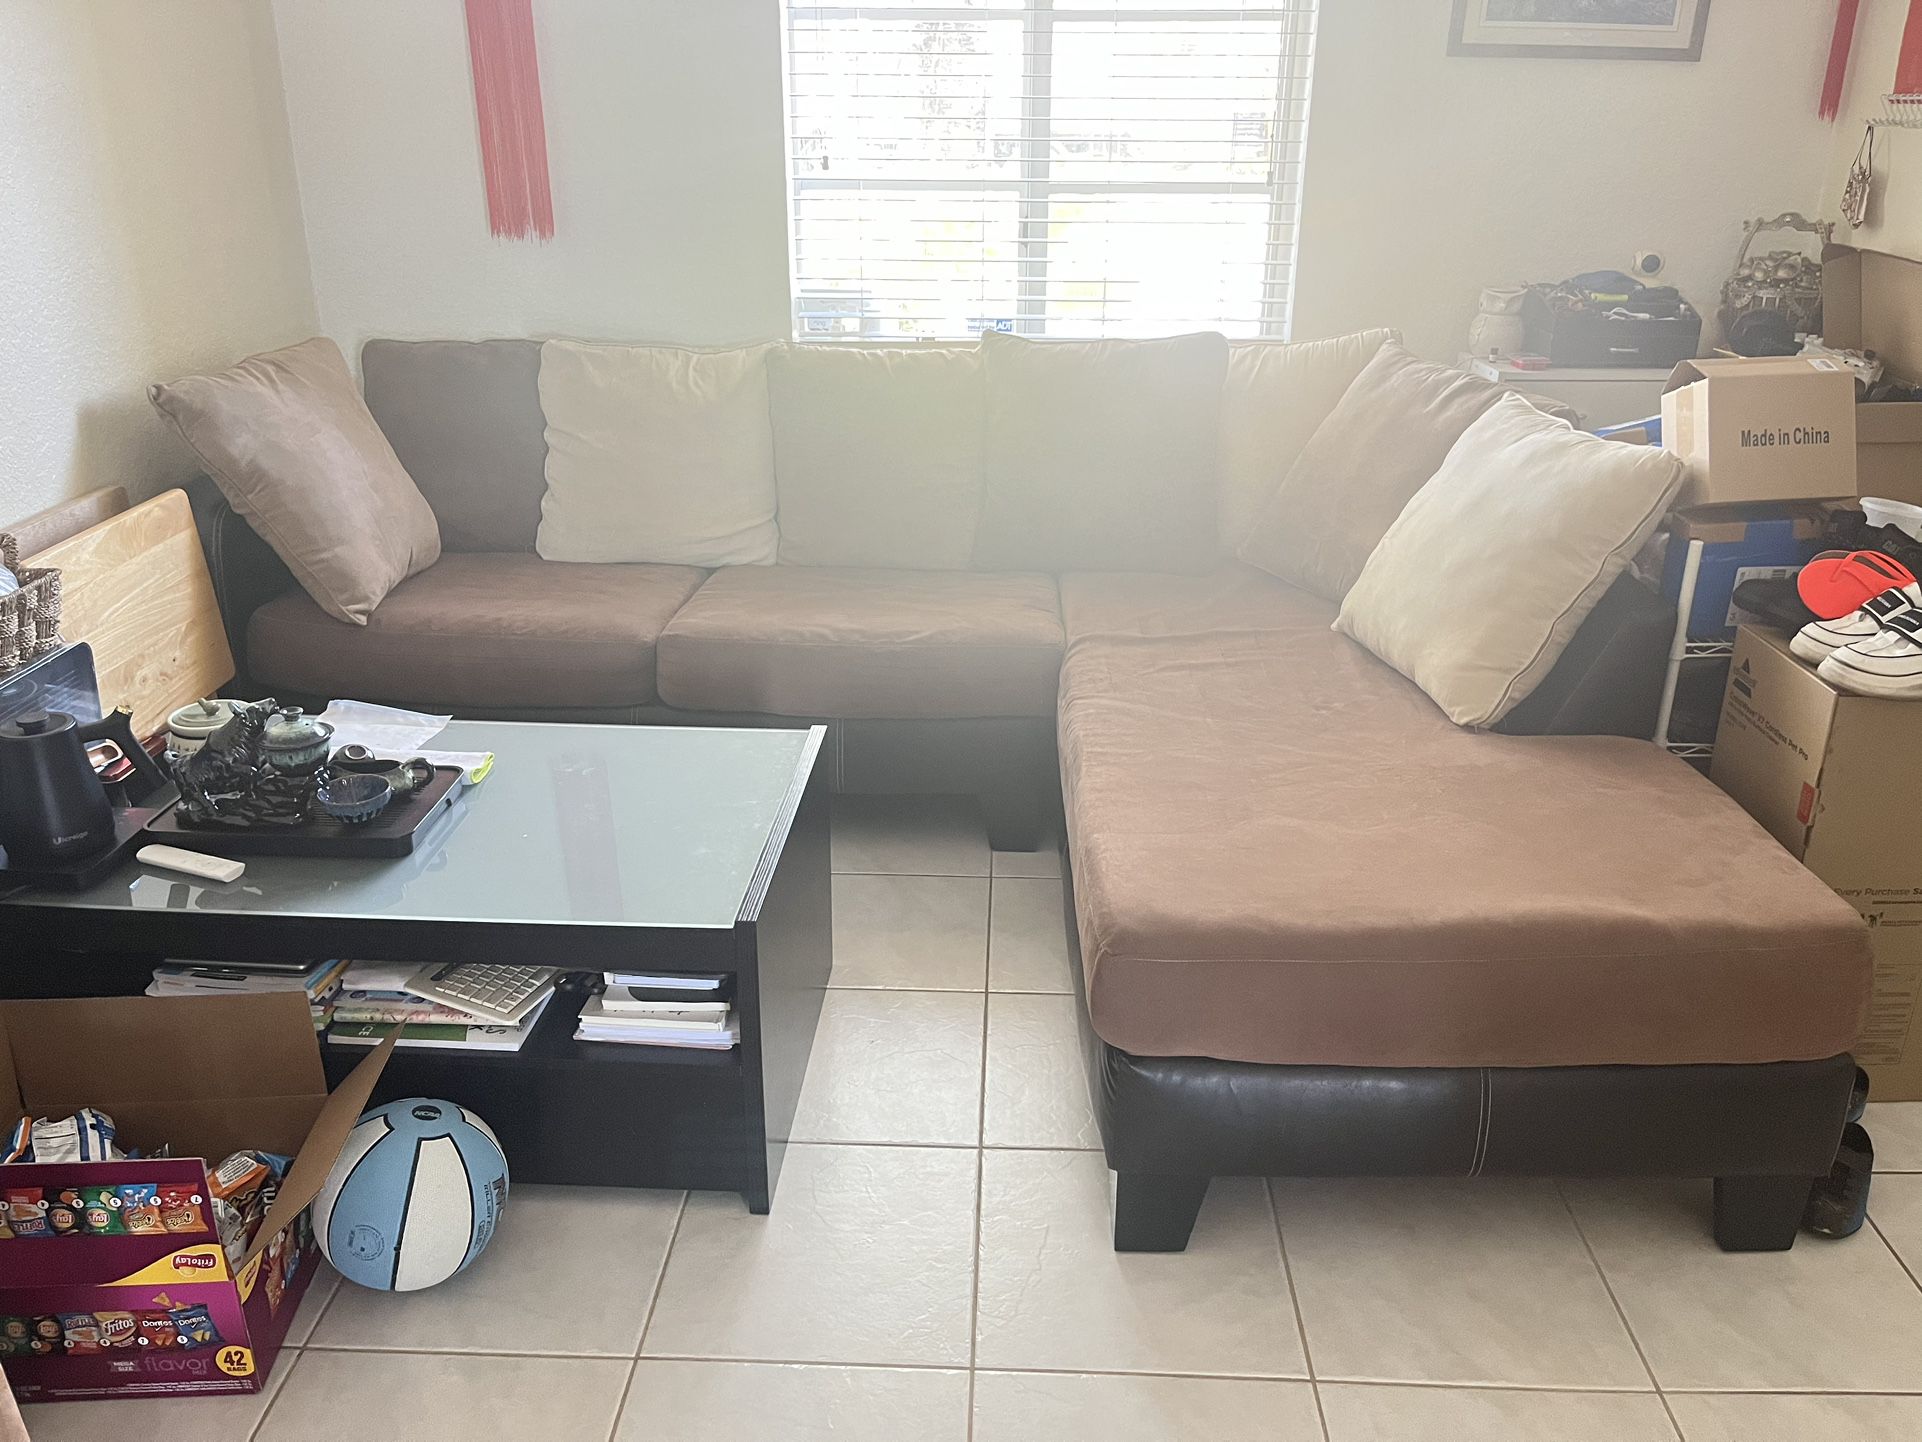 Used Sofa 105×37 inch, Chaise longer 80×37 inch